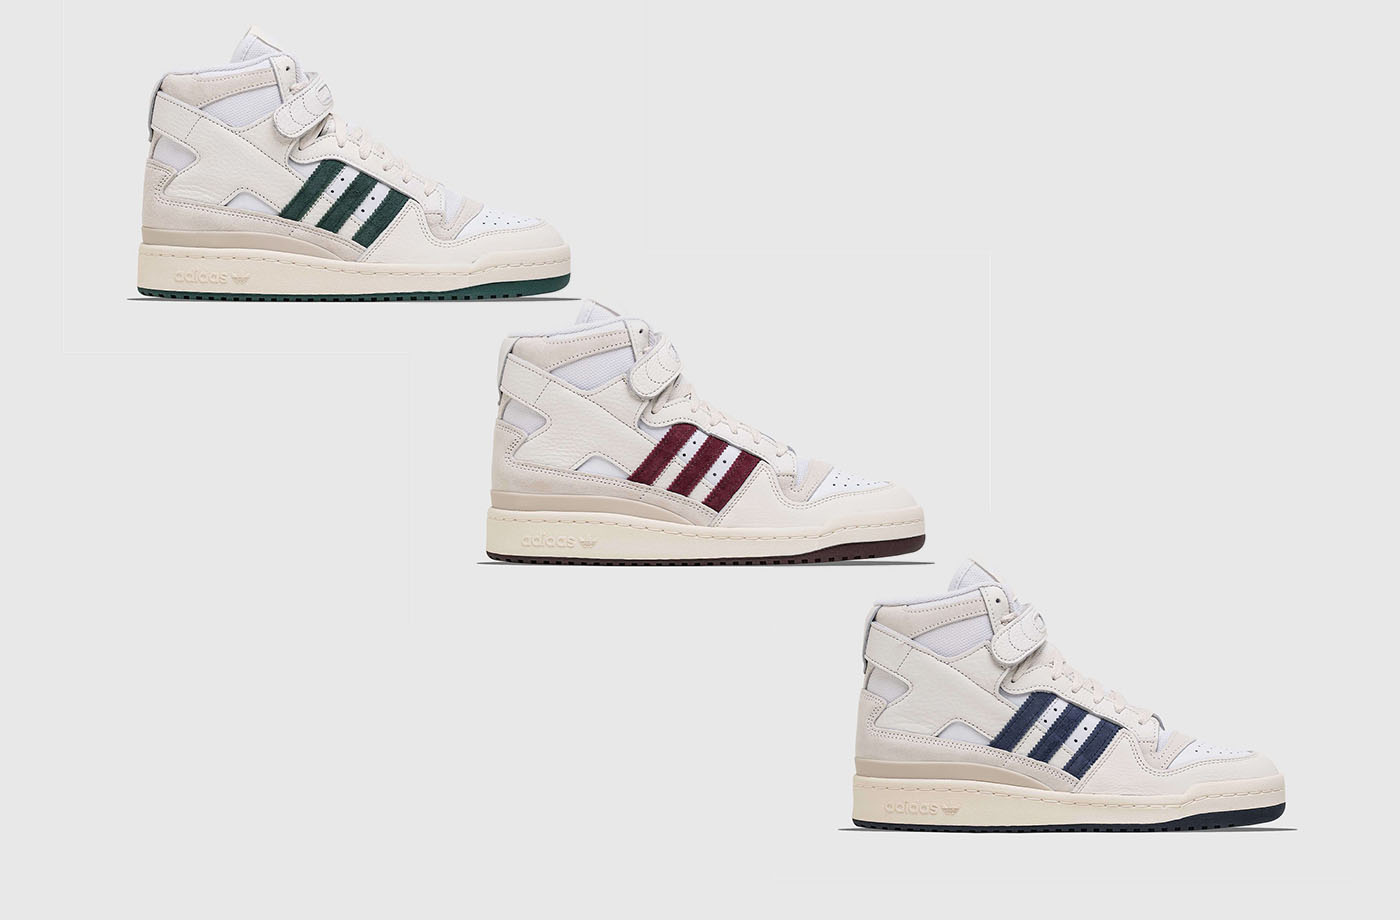 Packer x adidas Forum High Collection Release Date